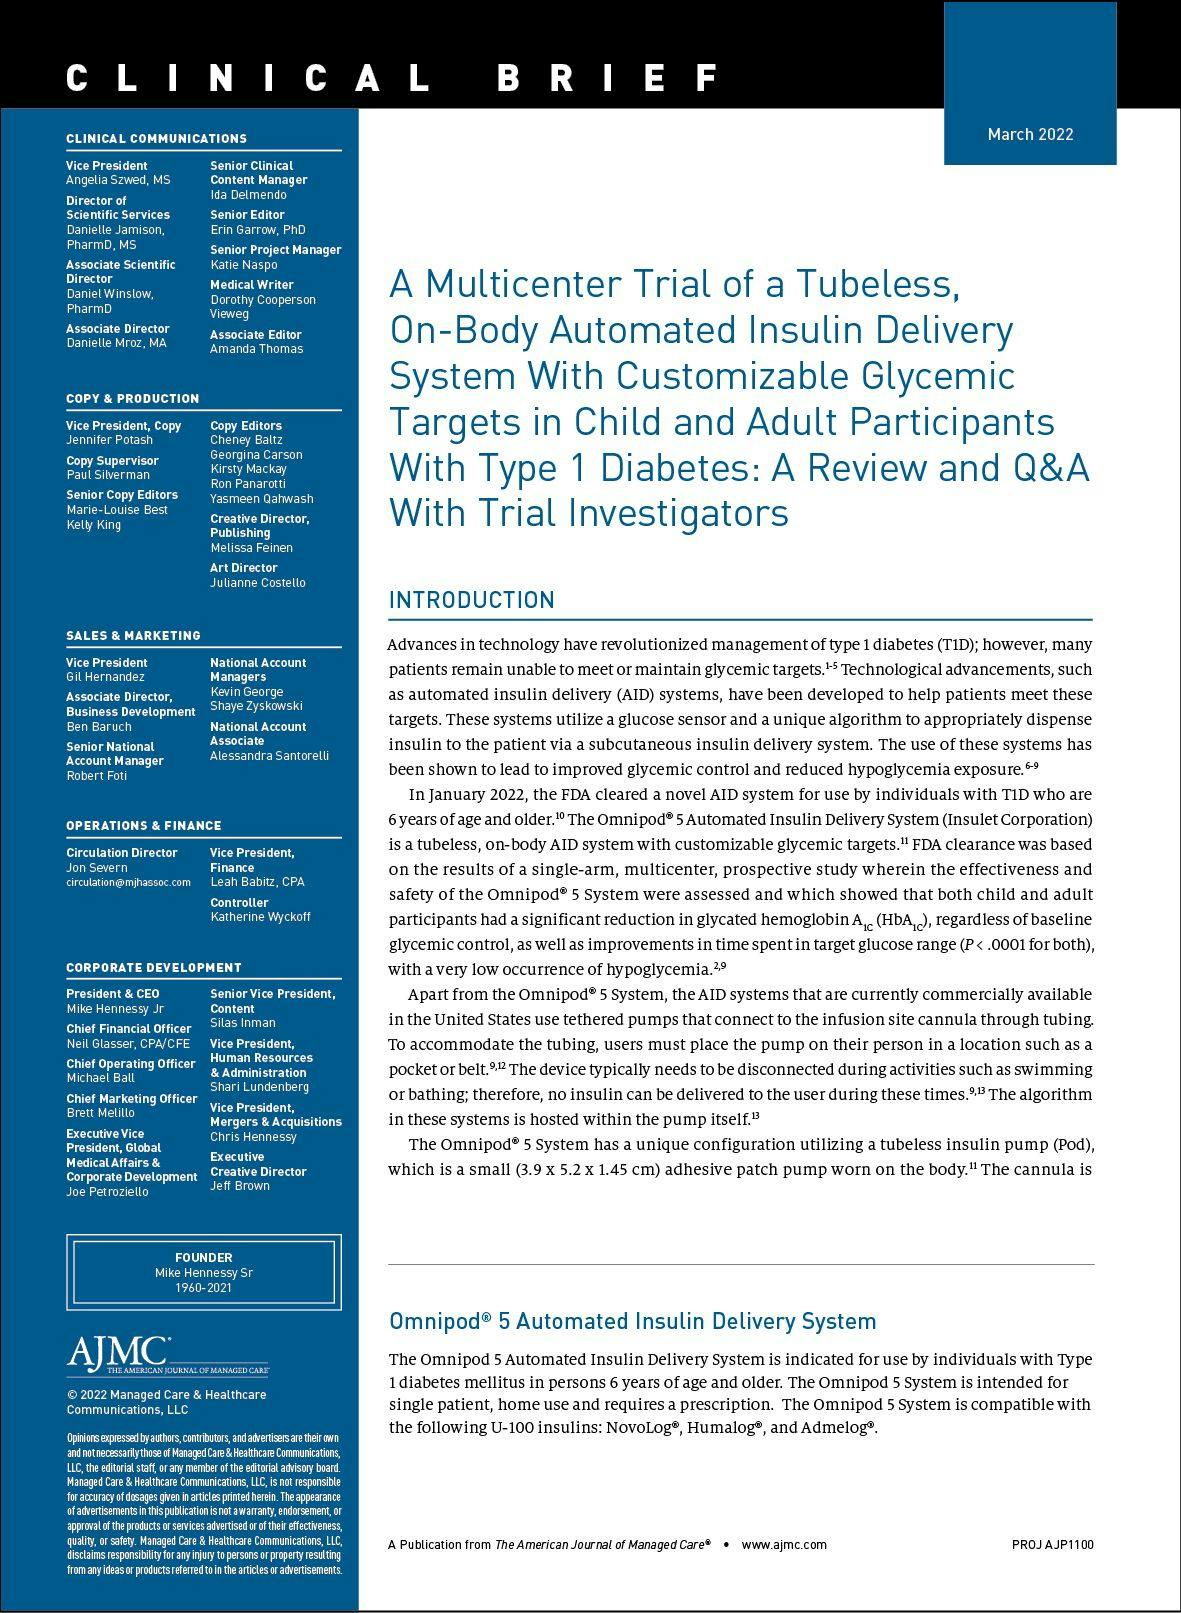 A Review of a Multicenter Trial of a Tubeless, On-Body Automated Insulin Delivery System With Customizable Glycemic Targets in Pediatric and Adult Participants With Type 1 Diabetes